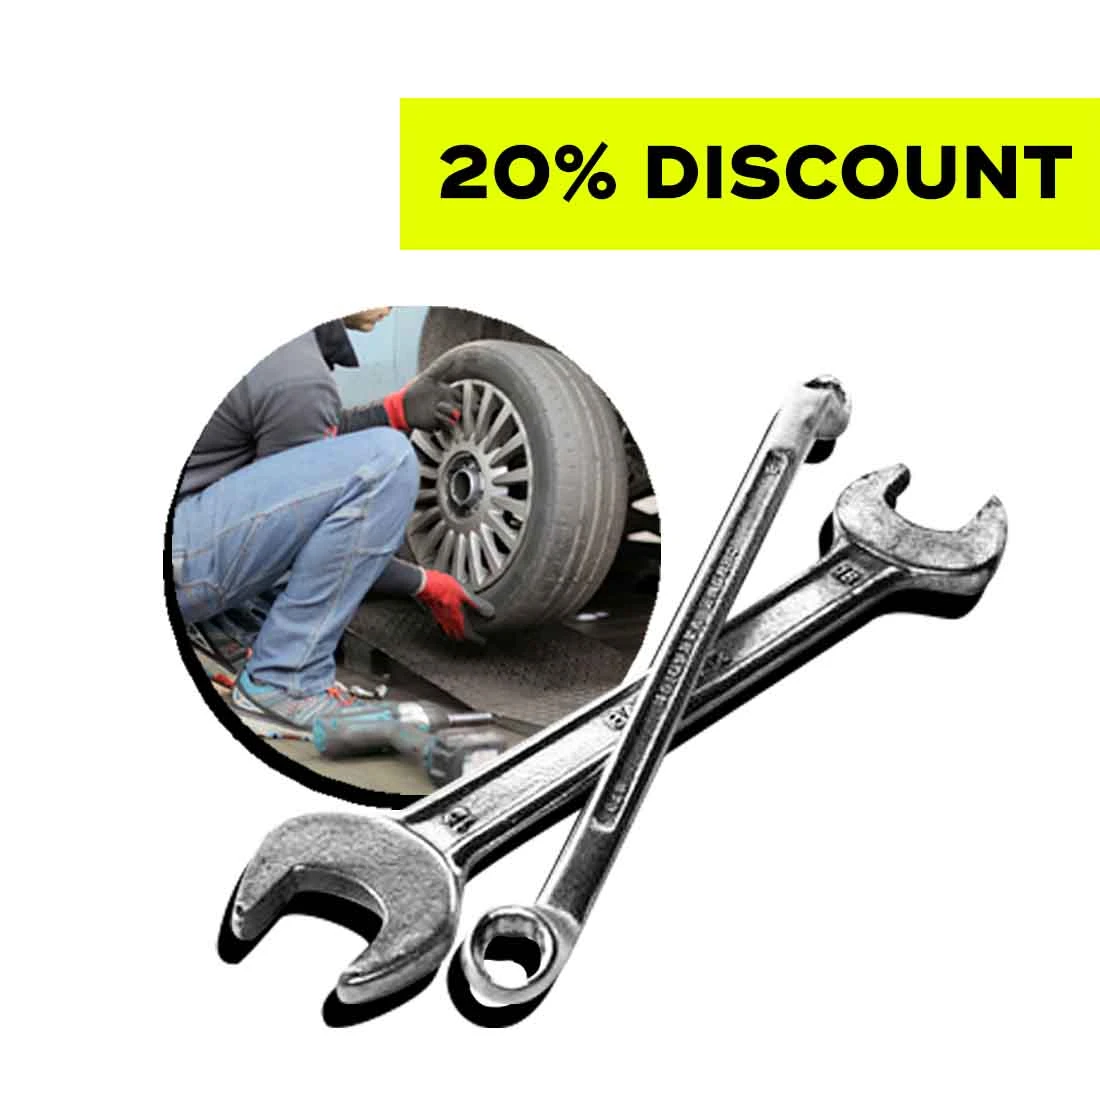 20% discount on car maintenance services